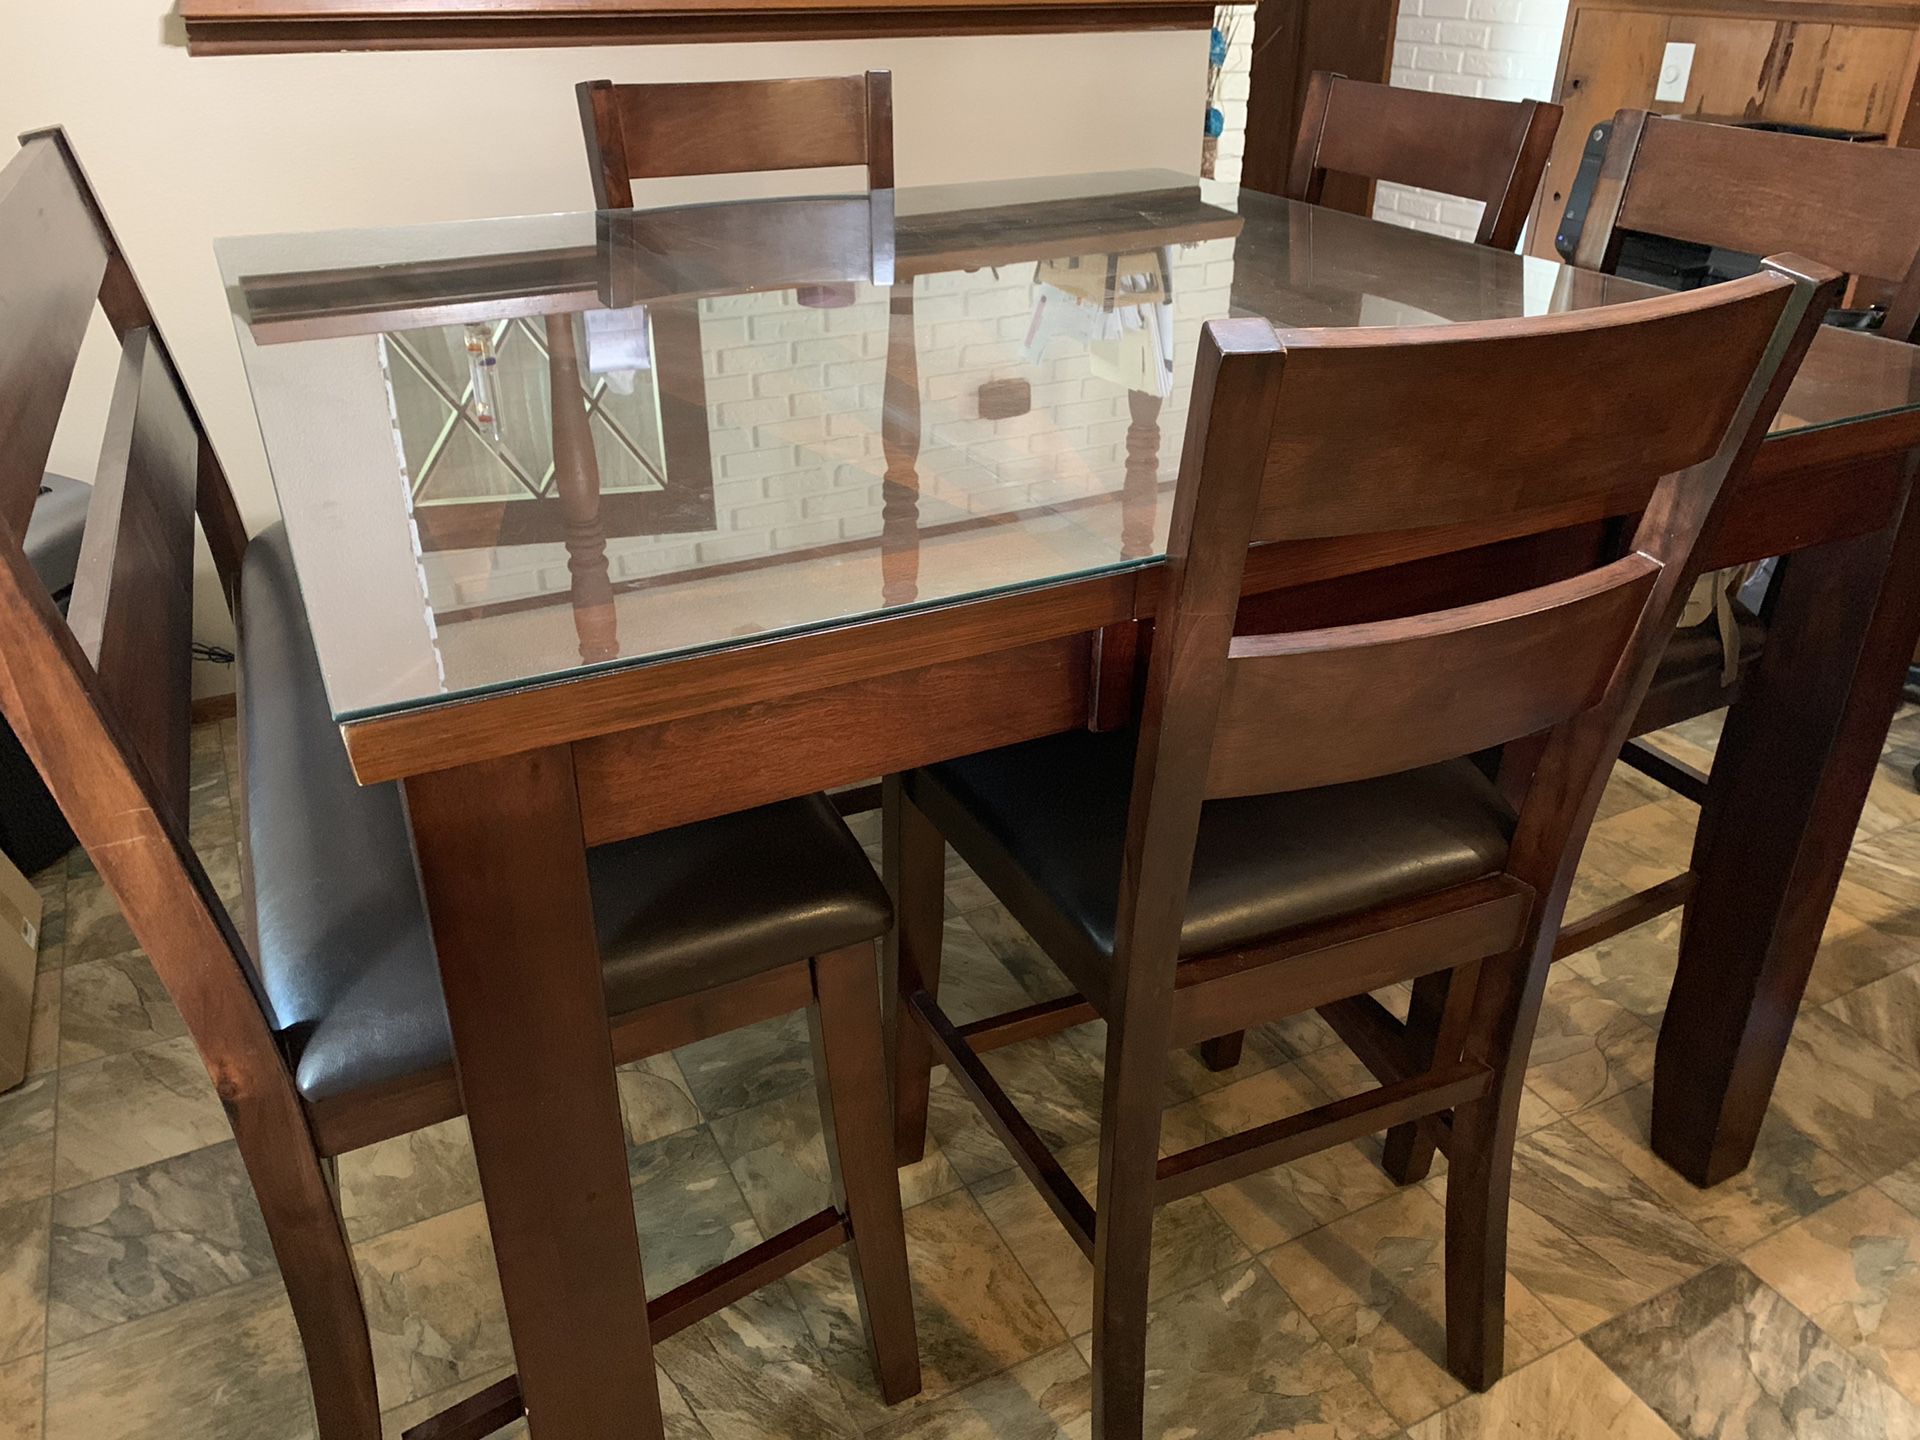 Counter height kitchen table. Glass top included. Seats 6.